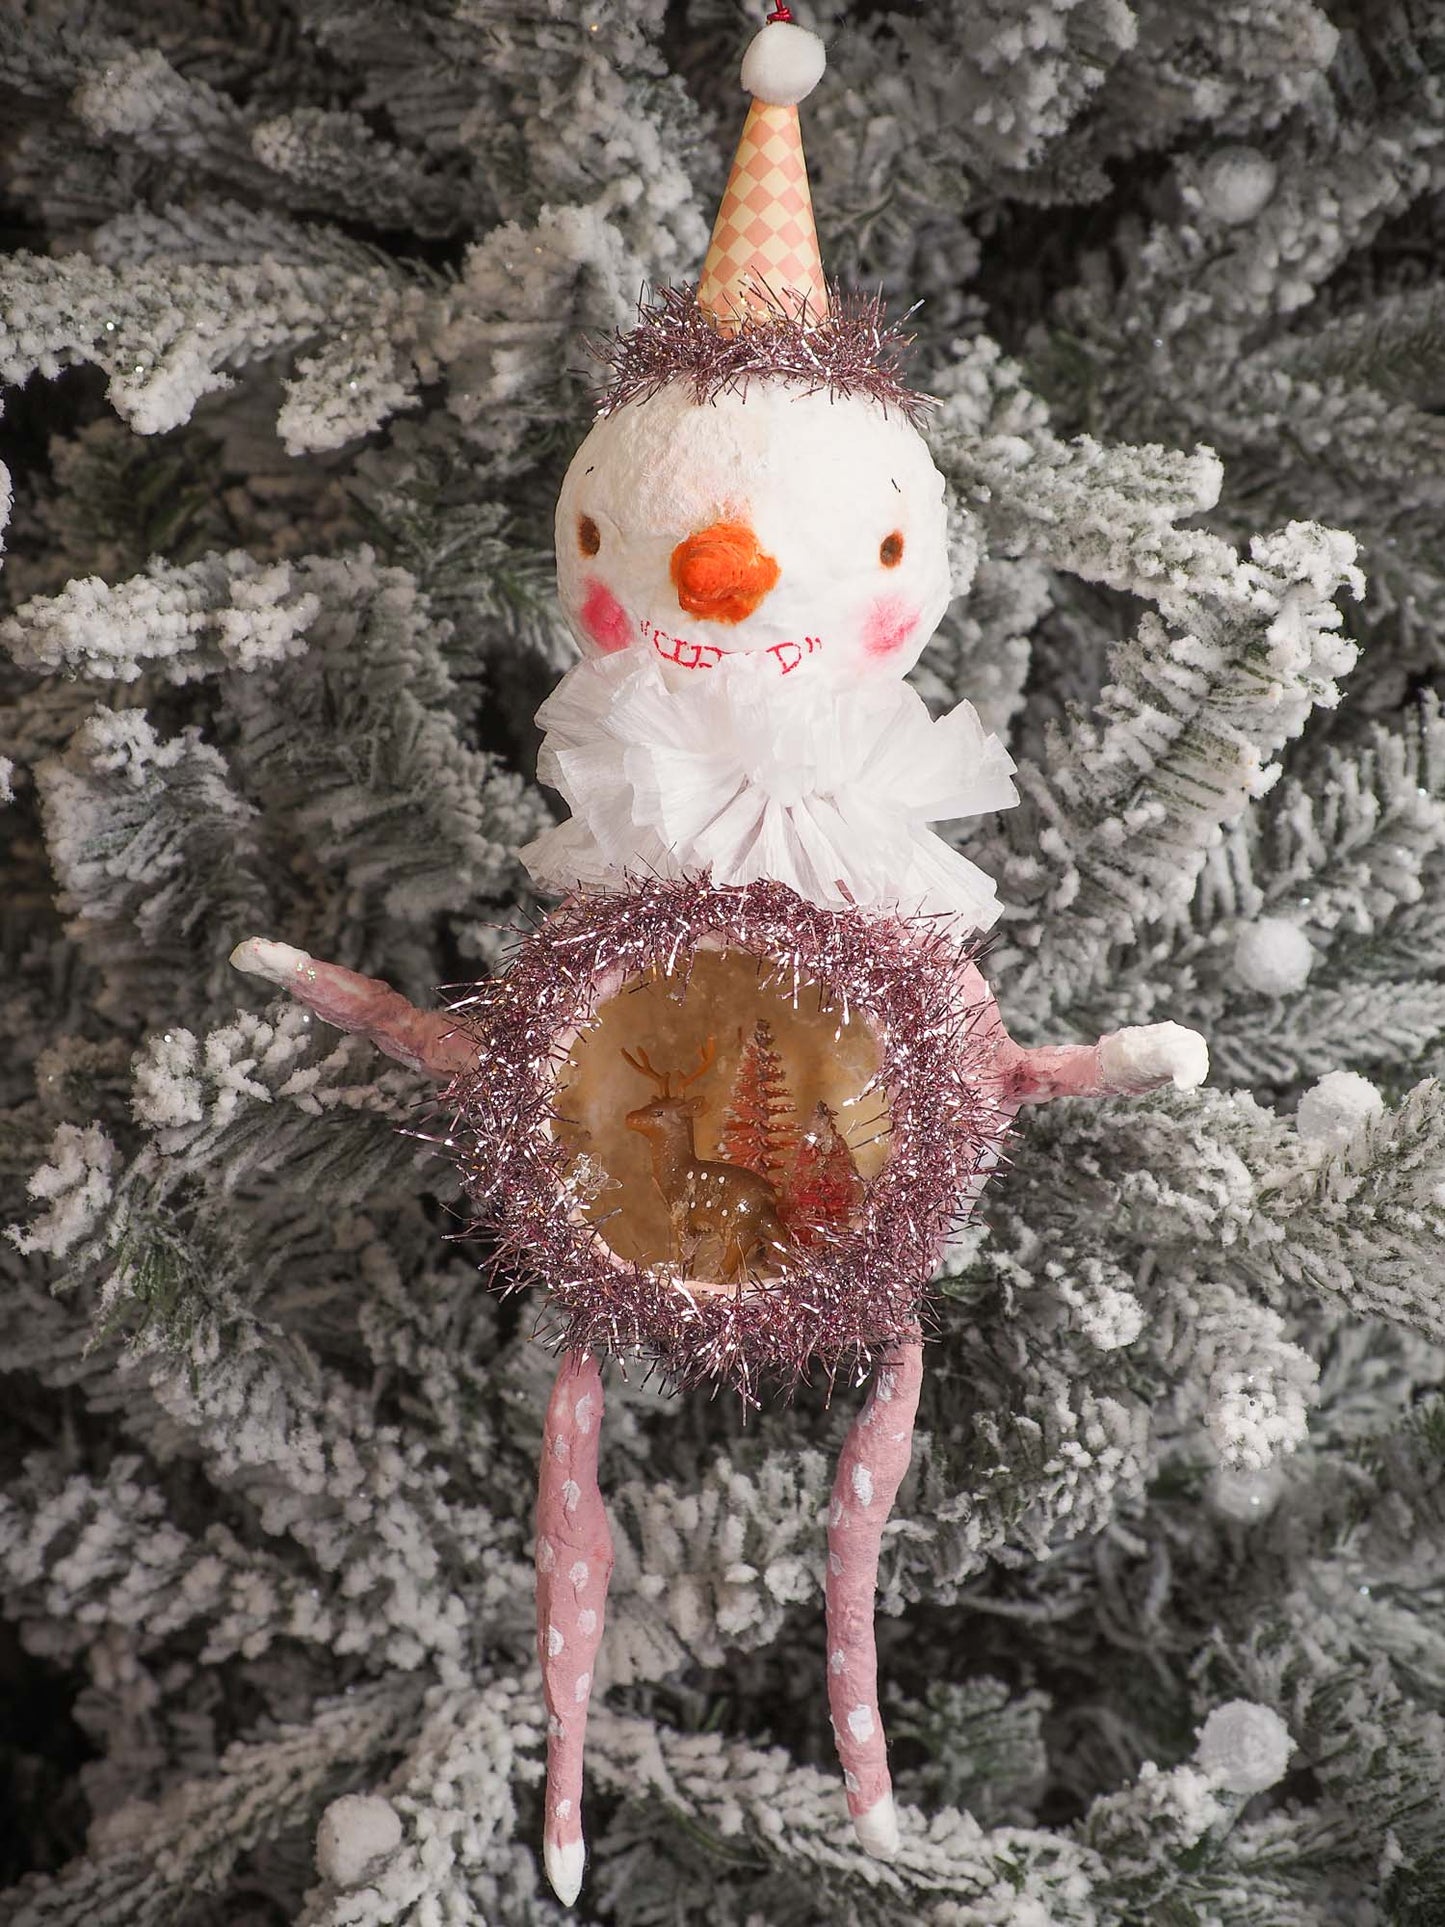 Adorable handmade spun cotton Art Doll Christmas tree ornament by Idania Salcido, the artist by Danita Art. Hand painted by the artist holiday figurine with paper hat with tinsel and vintage style garlands and a tiny Christmas tree. Hang this handmade ornament from your Christmas tree or use as Holiday decoration.